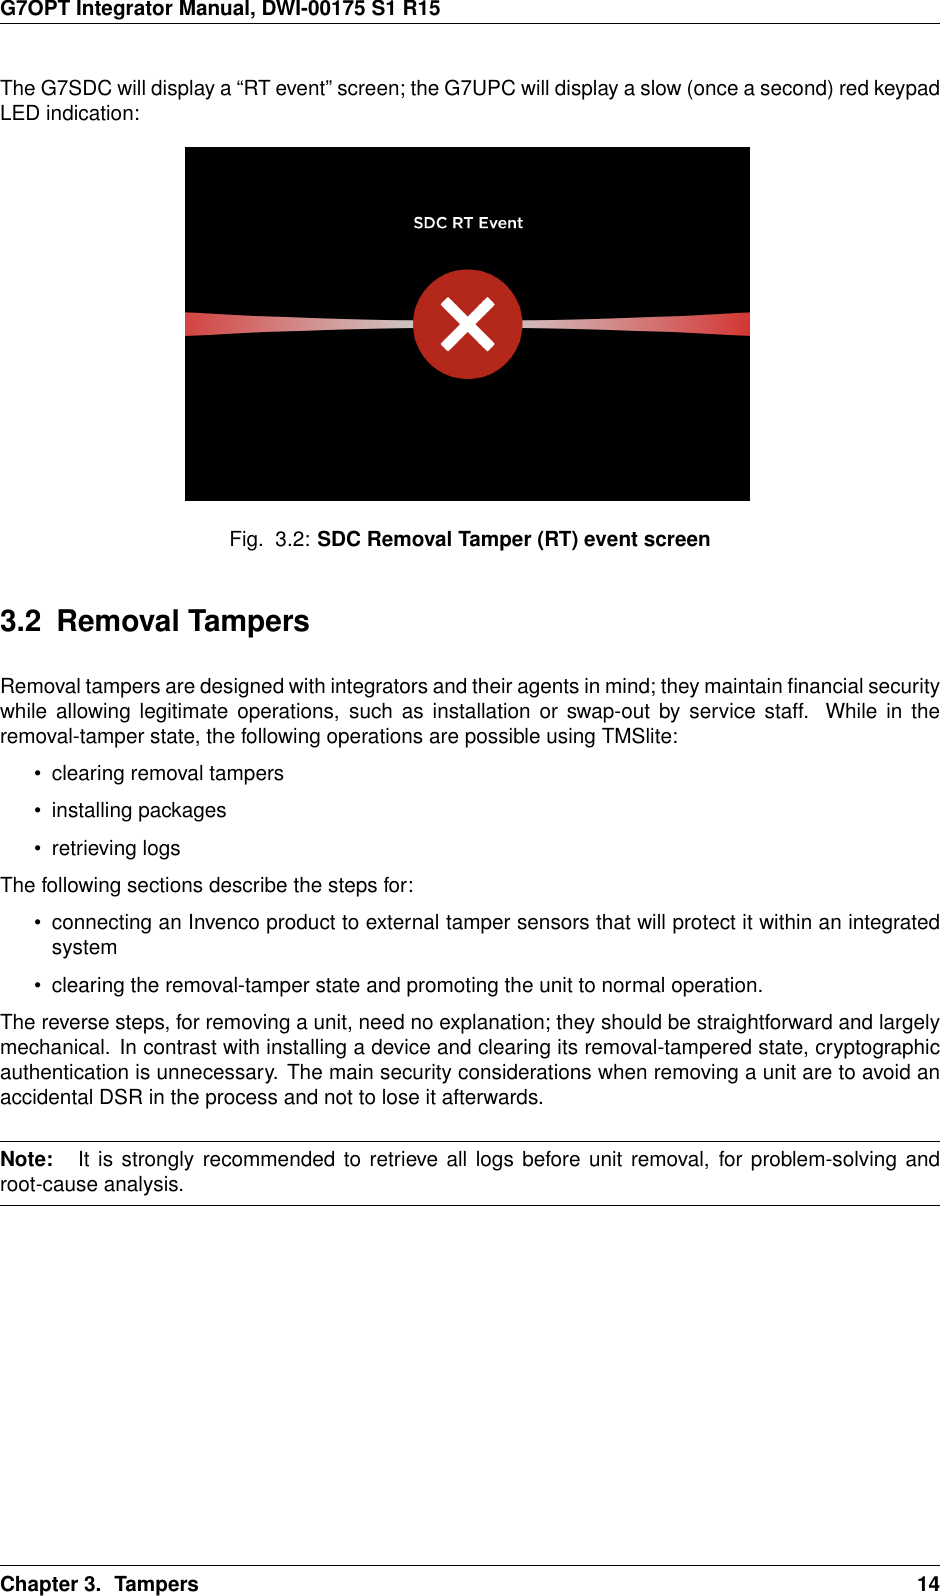 G7OPT Integrator Manual, DWI-00175 S1 R15The G7SDC will display a “RT event” screen; the G7UPC will display a slow (once a second) red keypadLED indication:Fig. 3.2: SDC Removal Tamper (RT) event screen3.2 Removal TampersRemoval tampers are designed with integrators and their agents in mind; they maintain ﬁnancial securitywhile allowing legitimate operations, such as installation or swap-out by service staff. While in theremoval-tamper state, the following operations are possible using TMSlite:• clearing removal tampers• installing packages• retrieving logsThe following sections describe the steps for:• connecting an Invenco product to external tamper sensors that will protect it within an integratedsystem• clearing the removal-tamper state and promoting the unit to normal operation.The reverse steps, for removing a unit, need no explanation; they should be straightforward and largelymechanical. In contrast with installing a device and clearing its removal-tampered state, cryptographicauthentication is unnecessary. The main security considerations when removing a unit are to avoid anaccidental DSR in the process and not to lose it afterwards.Note: It is strongly recommended to retrieve all logs before unit removal, for problem-solving androot-cause analysis.Chapter 3. Tampers 14